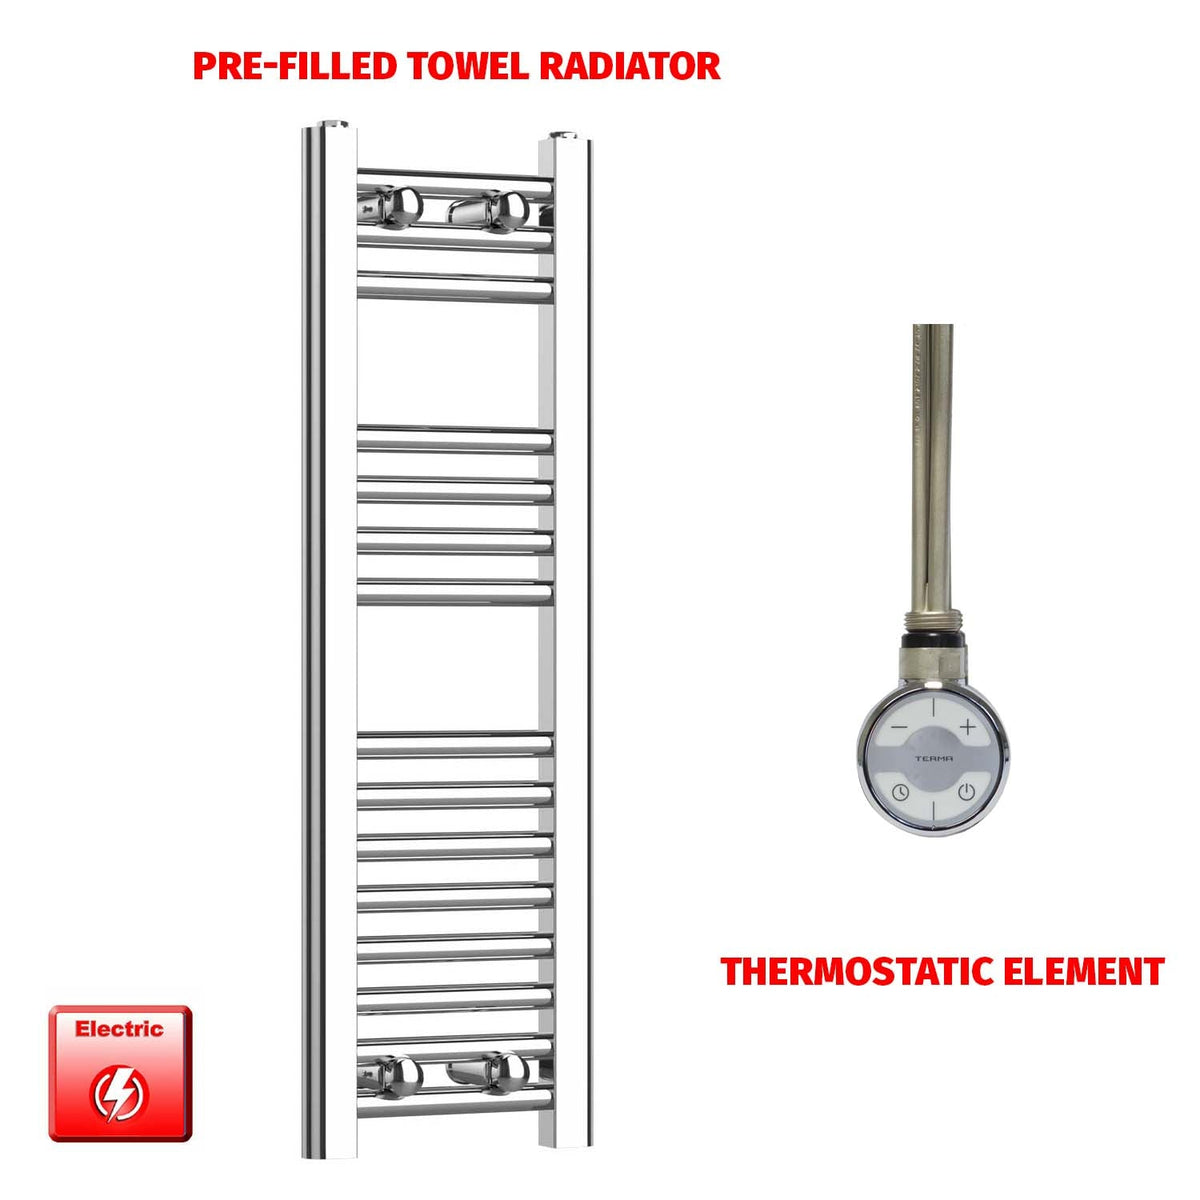 800 x 200 Pre-Filled Electric Heated Towel Radiator Straight Chrome moa element no timer